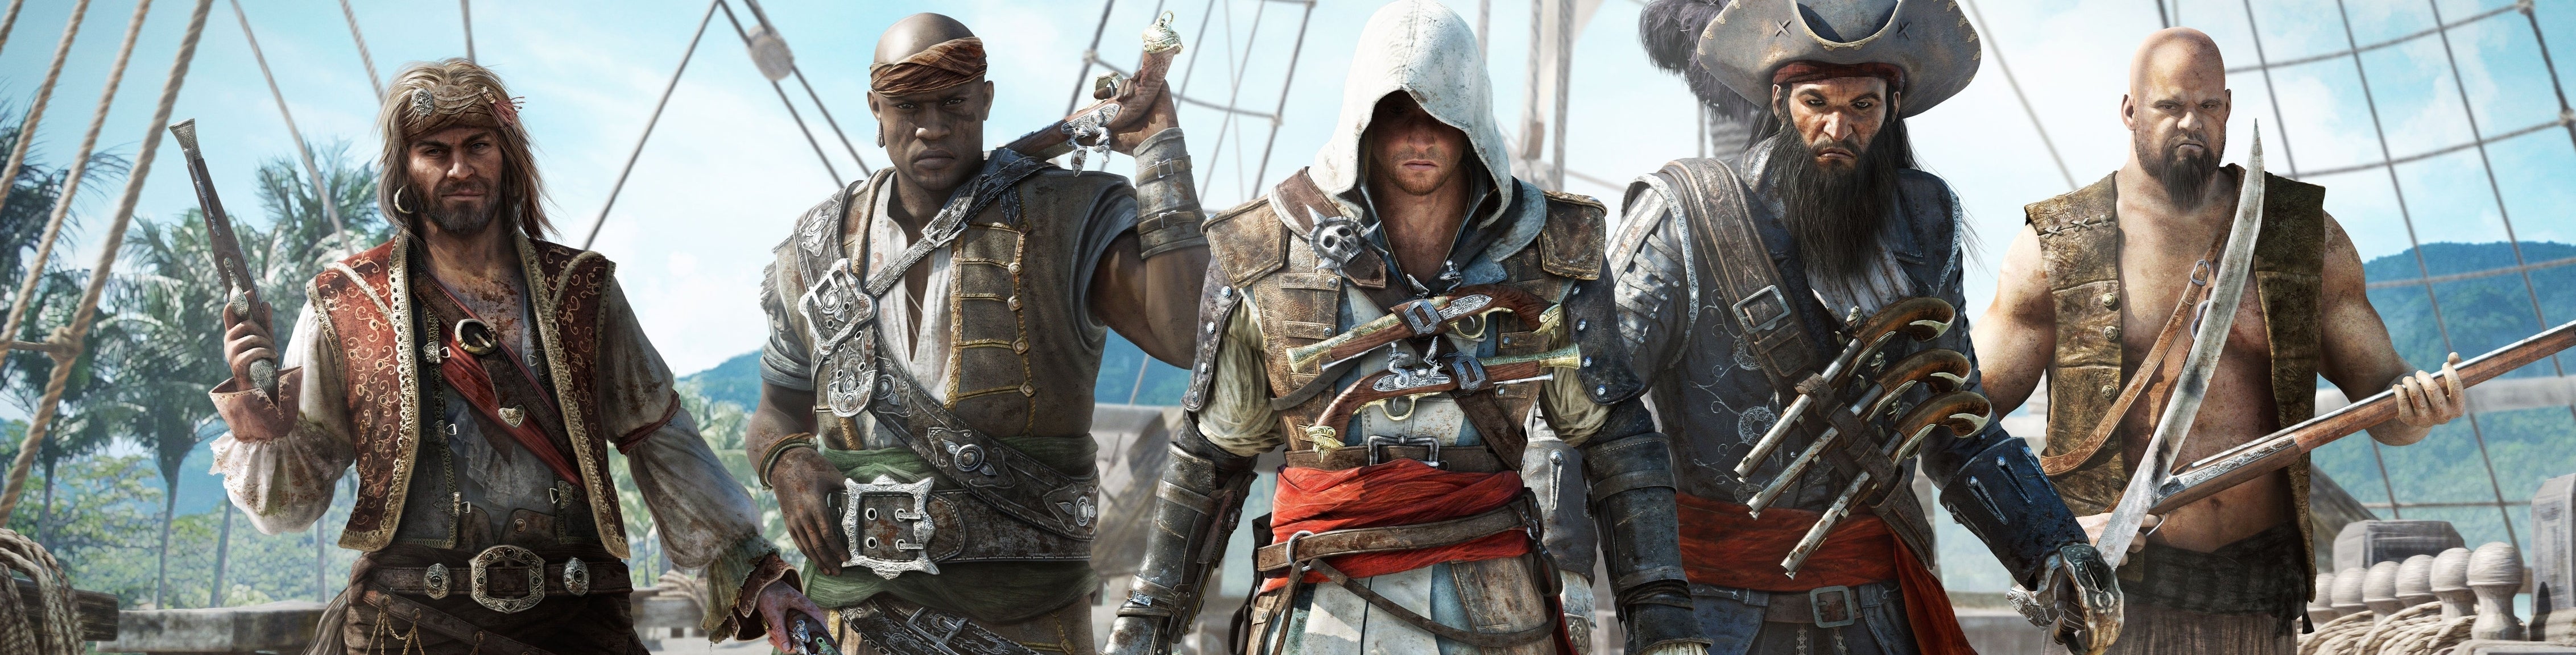 Image for Face-Off: Assassin's Creed 4: Black Flag